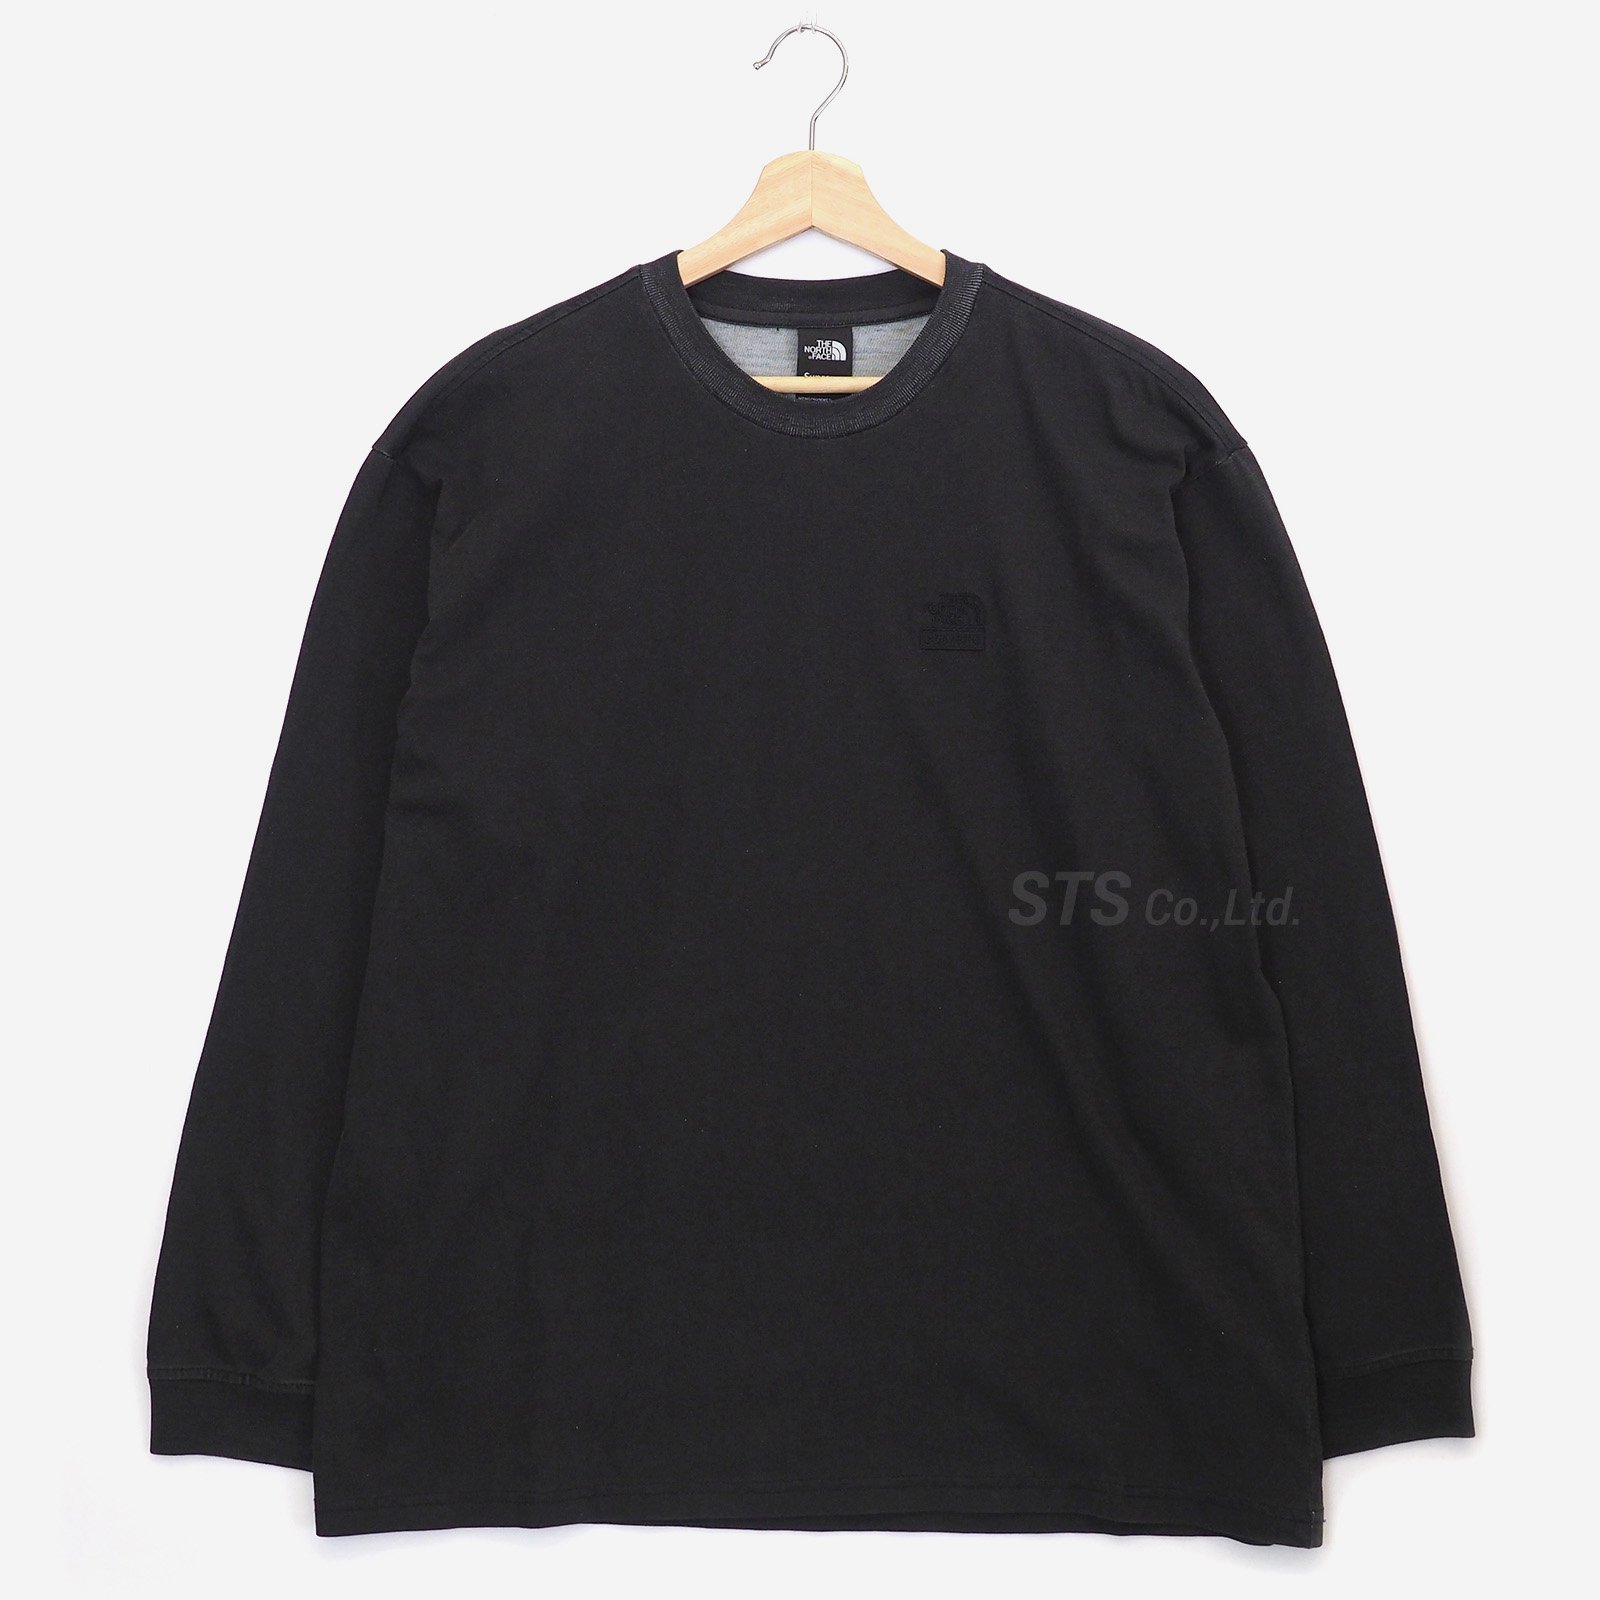 Supreme/The North Face Pigment Printed L/S Top - UG.SHAFT